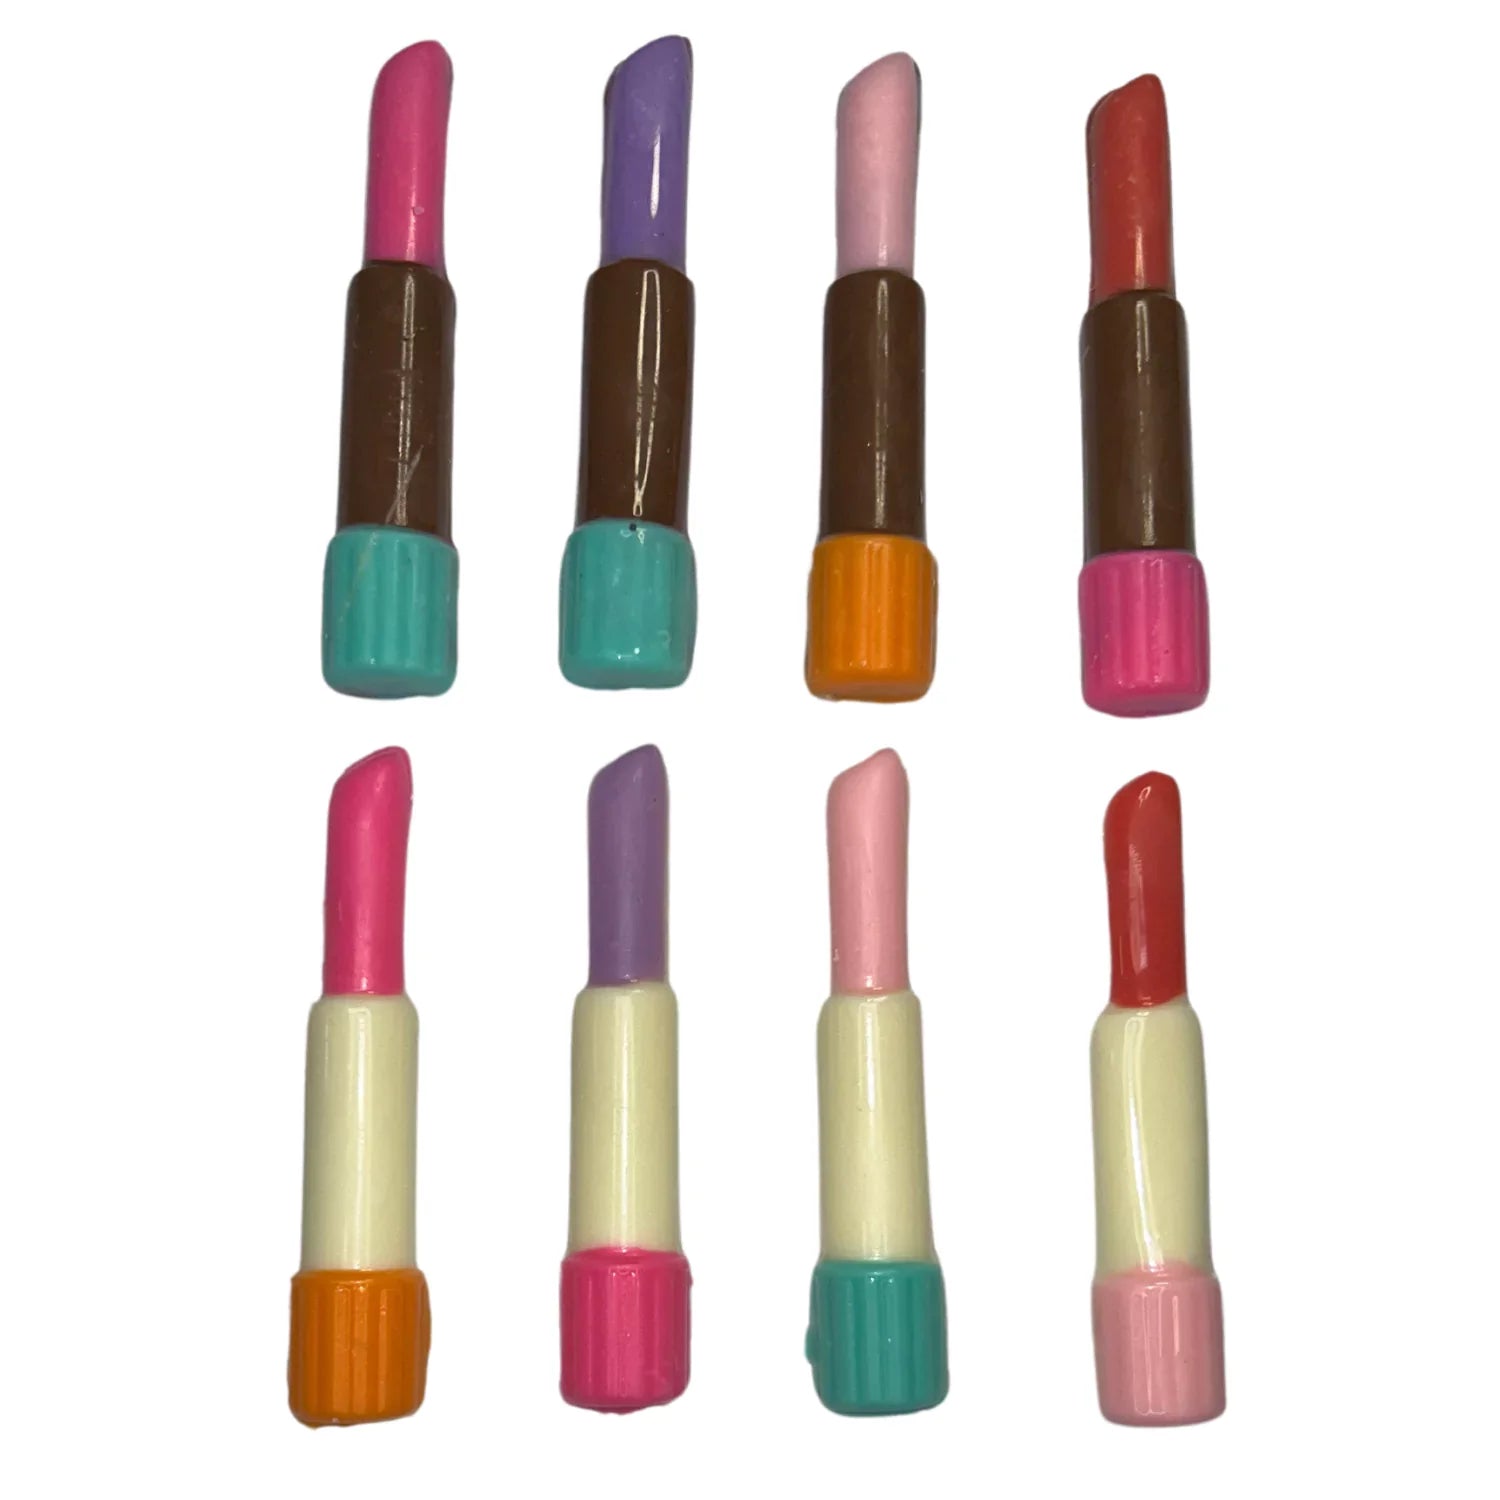 Assorted Colors Lipstick White and Chocolate Milk Chocolate 0.4 oz each Candy